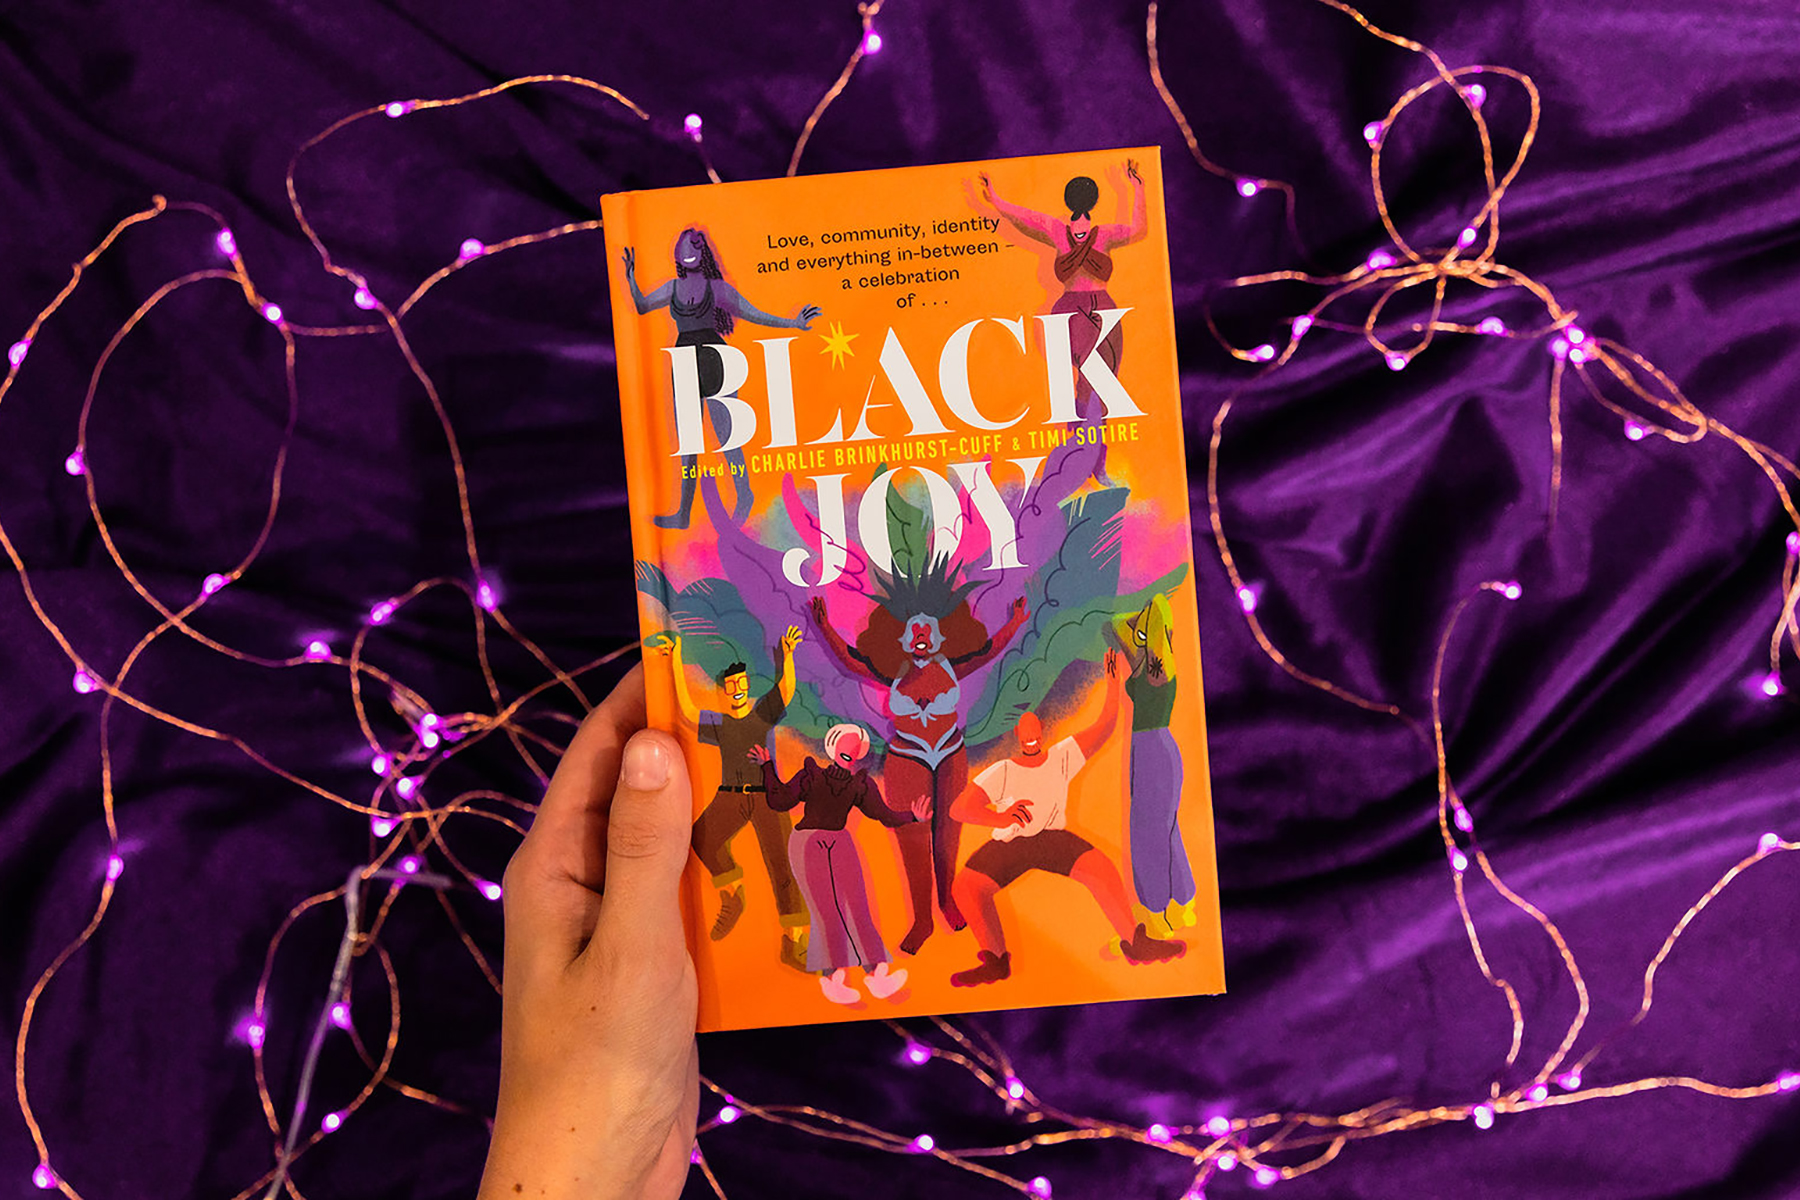 An image of the book Black Joy being help by a hand in front of a purple material background with purple fairy lights